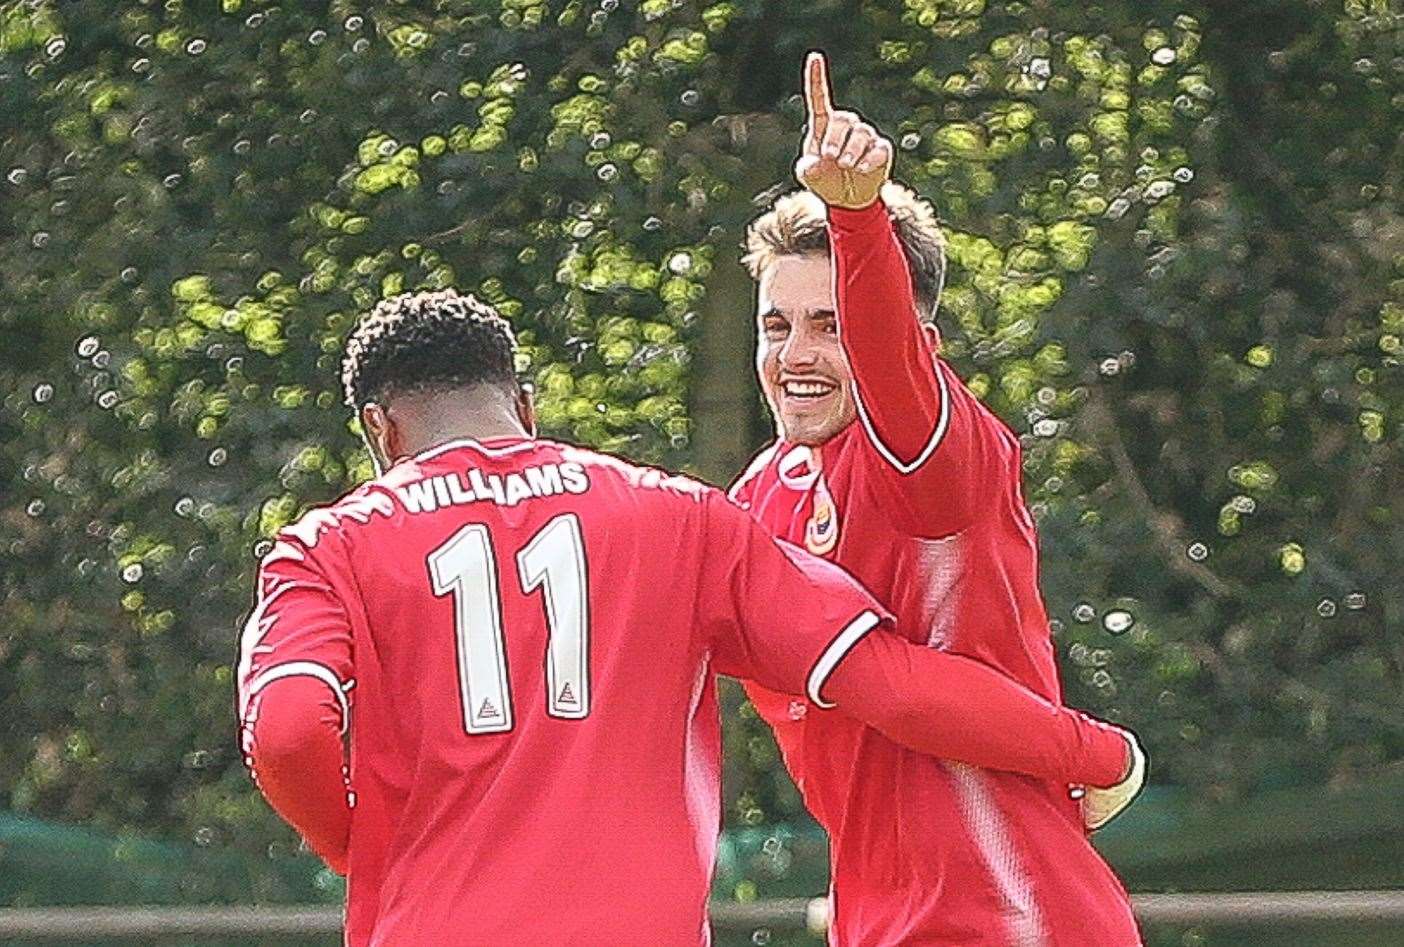 Liam Gillies celebrates his goal in Whitstable’s 4-0 victory over Holmesdale last weekend Picture: Les Biggs